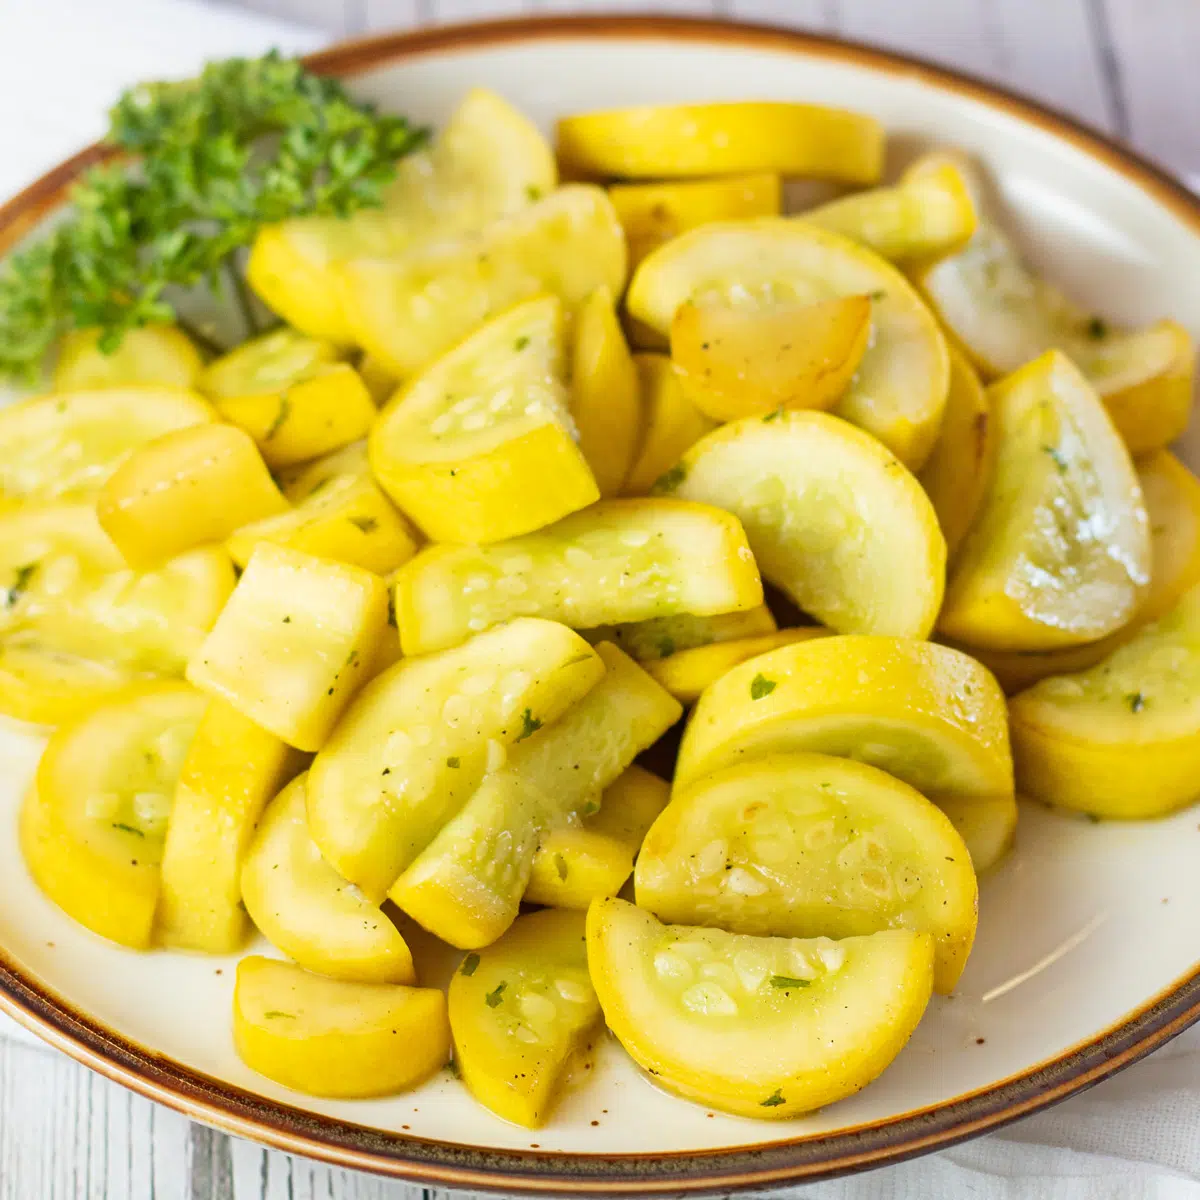 Square image of a plate with sauteed yellow squash.